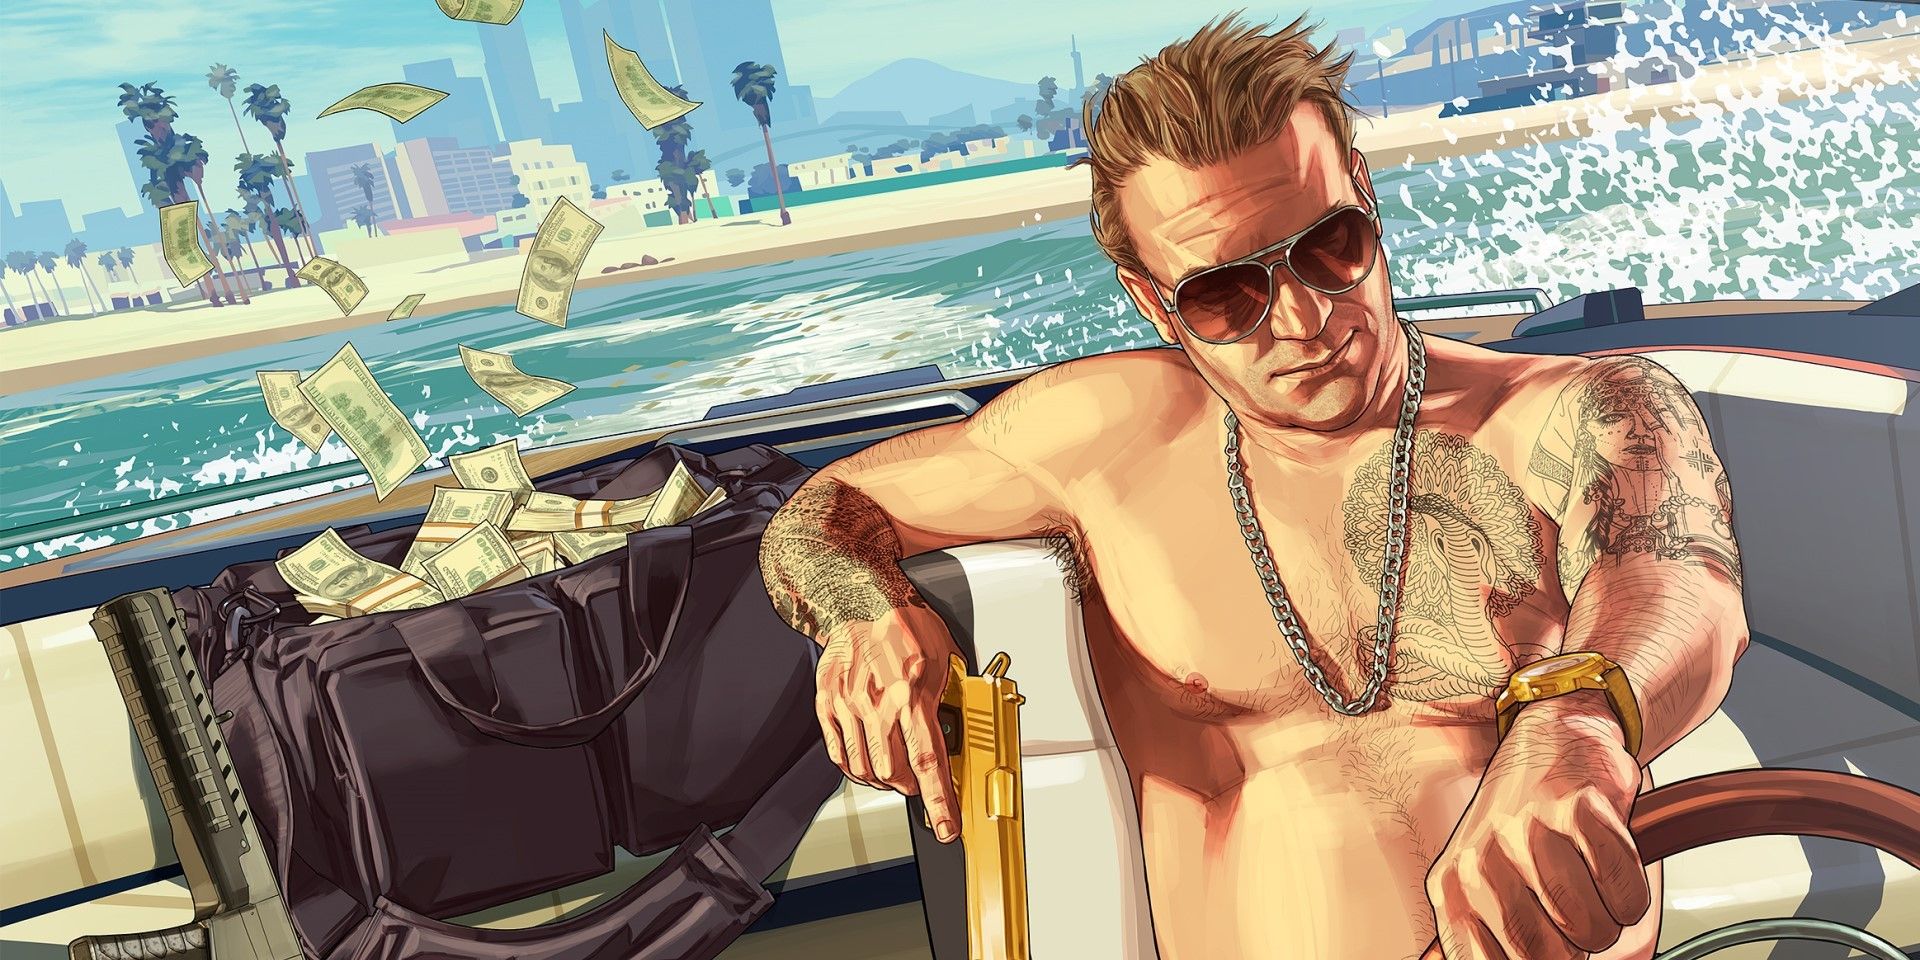 Grand theft auto man with pistol driving away on boat with money duffel